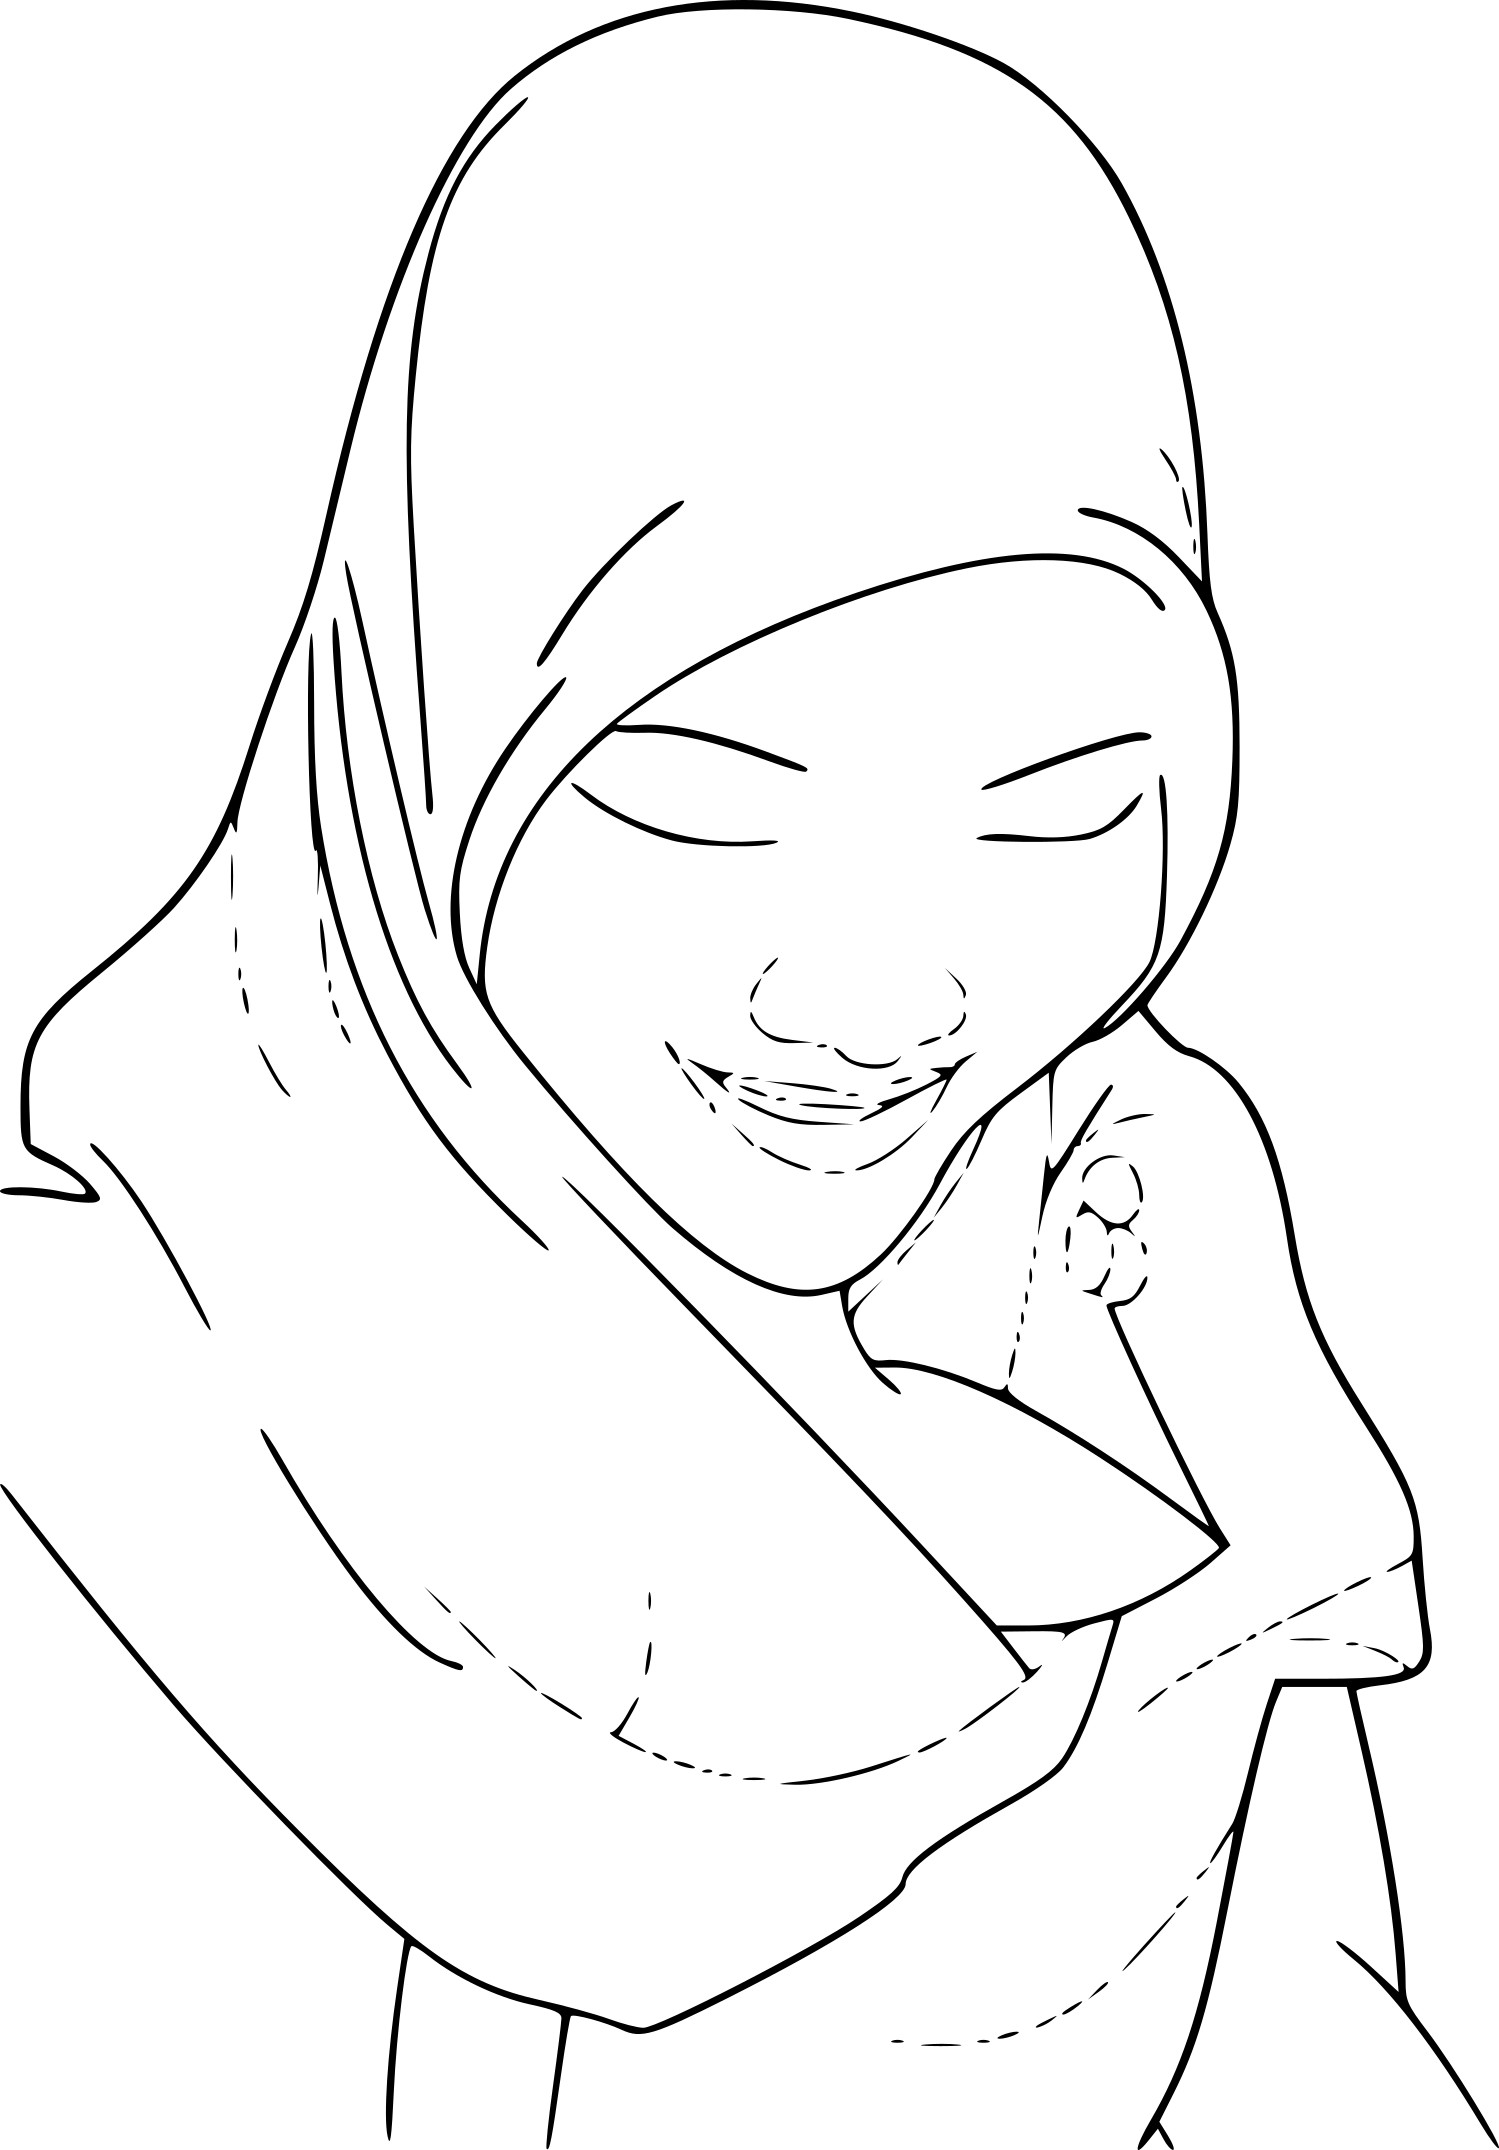 Hijab coloring page - free printable coloring pages on coloori.com